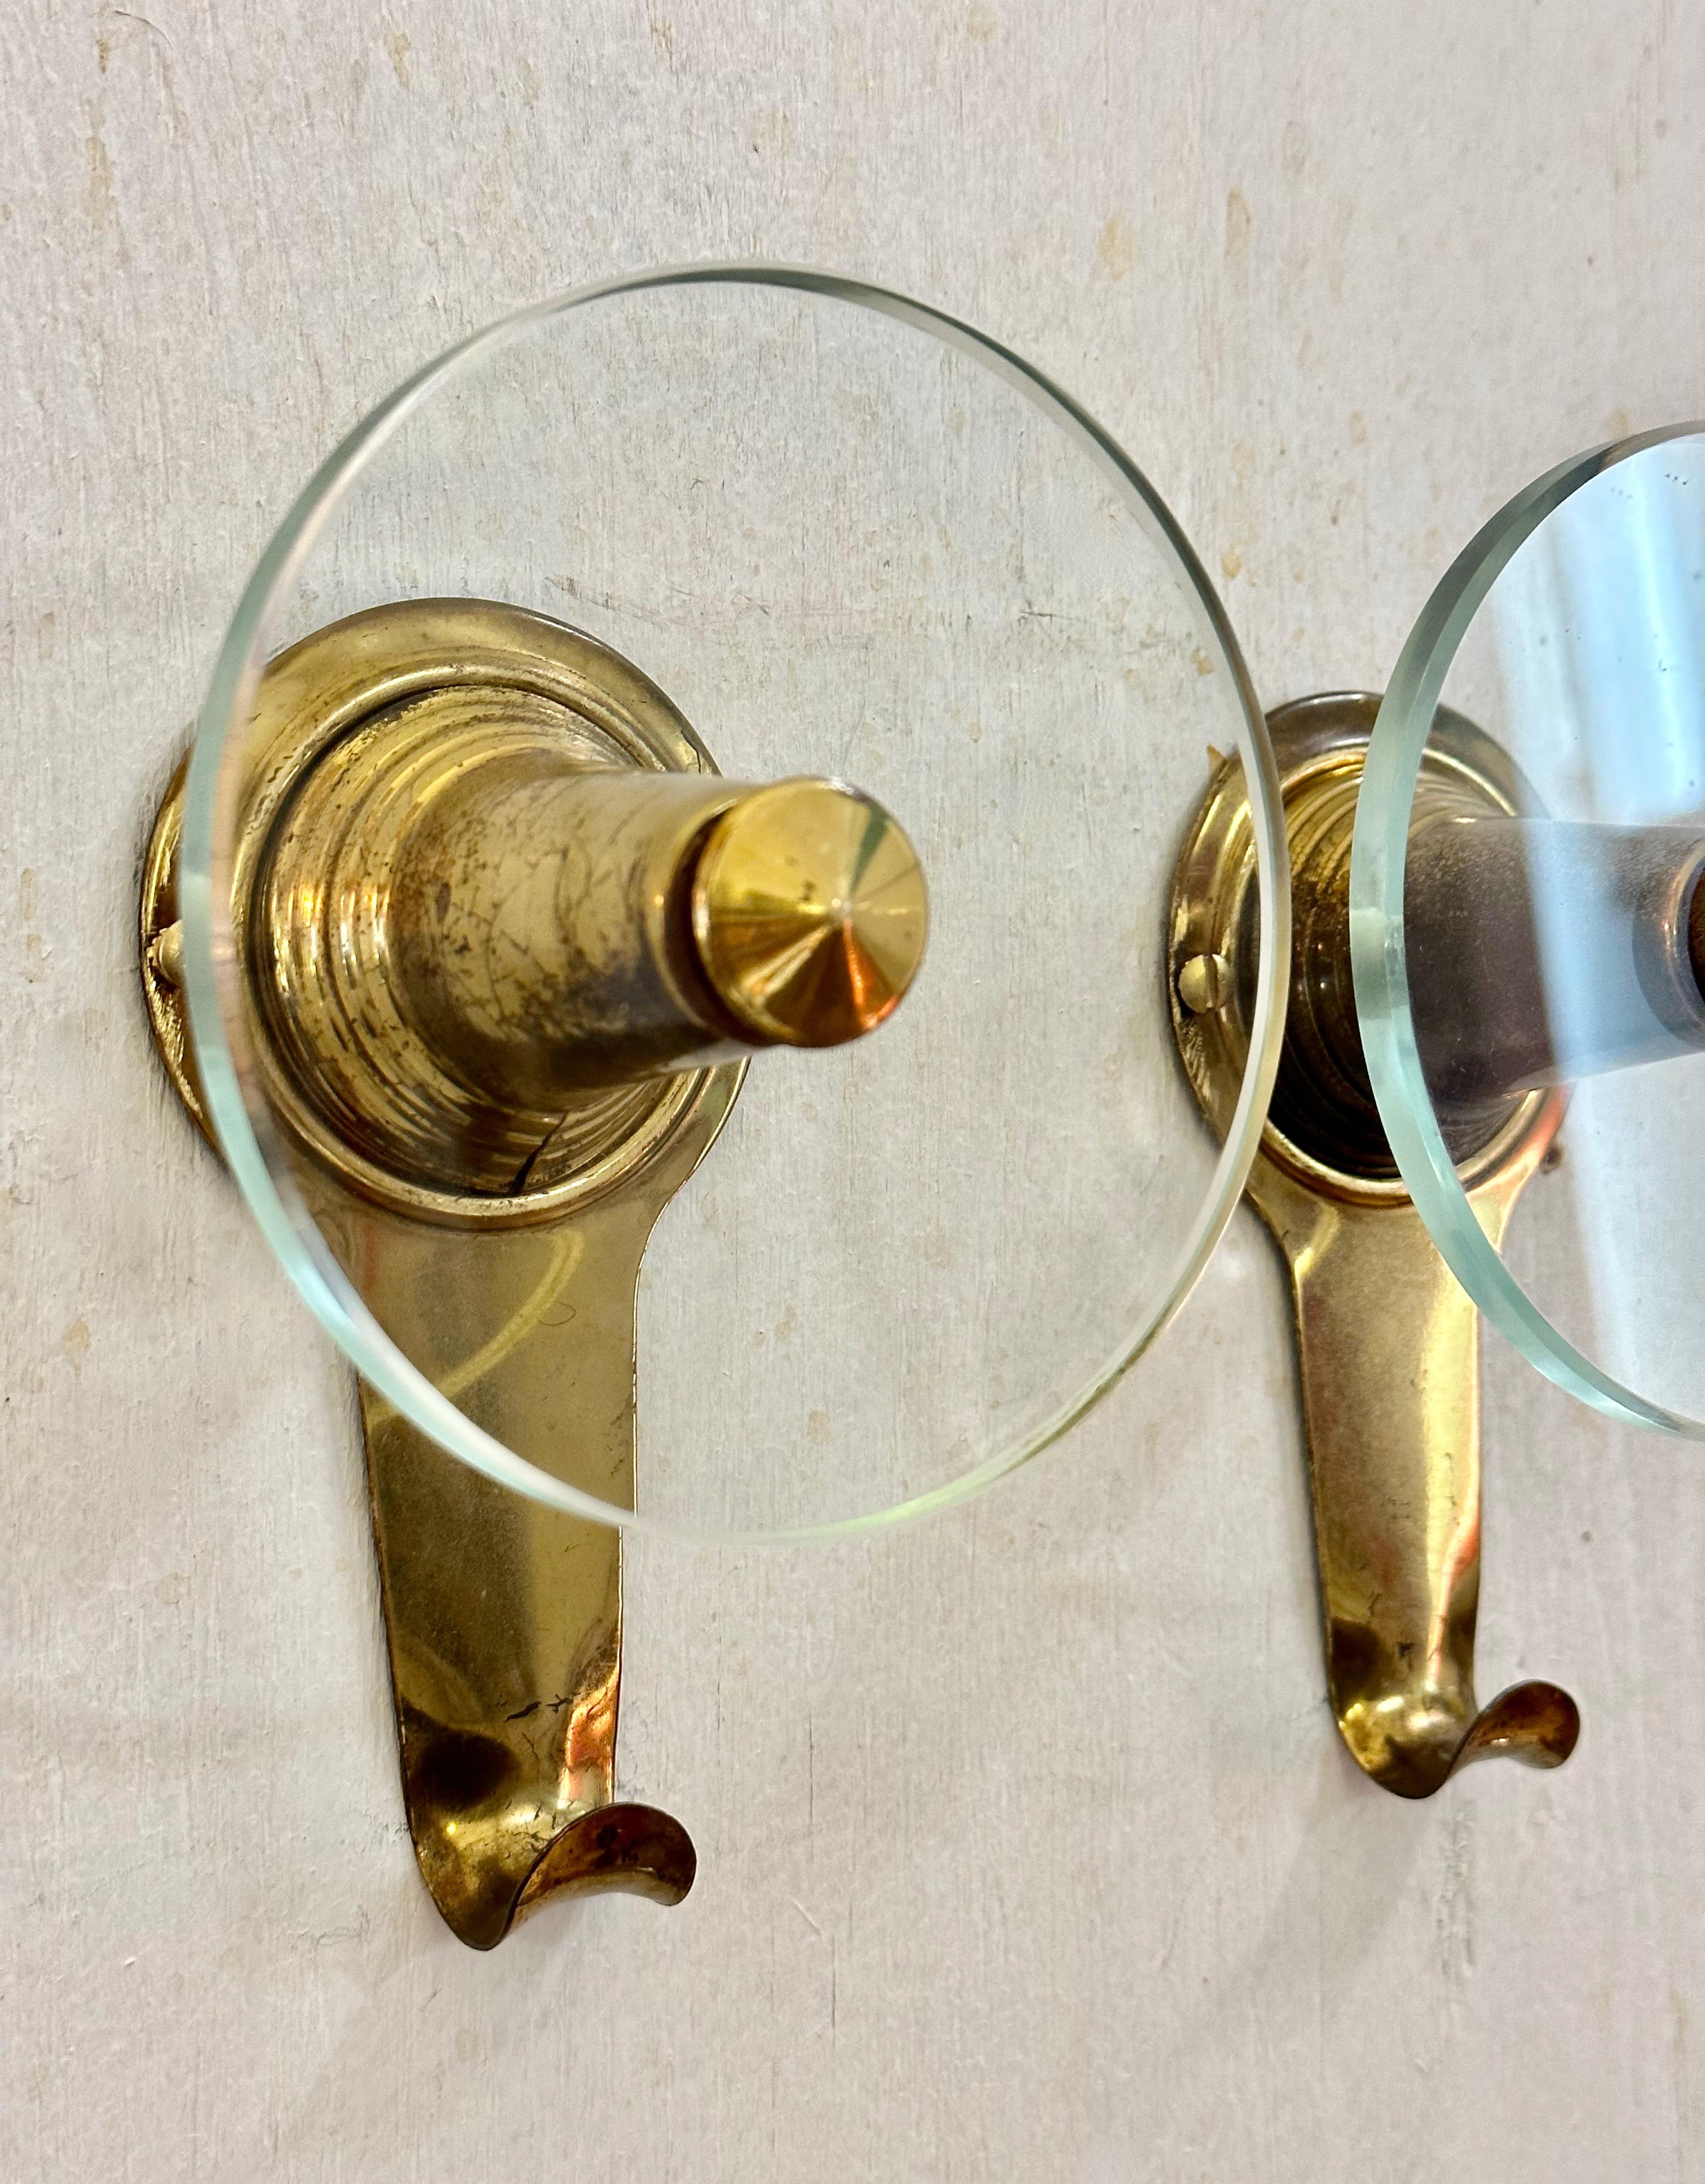 Mid-20th Century Italian Mid-Centuty Modern Wall Brass and Glass Coat Racks, 1950 For Sale